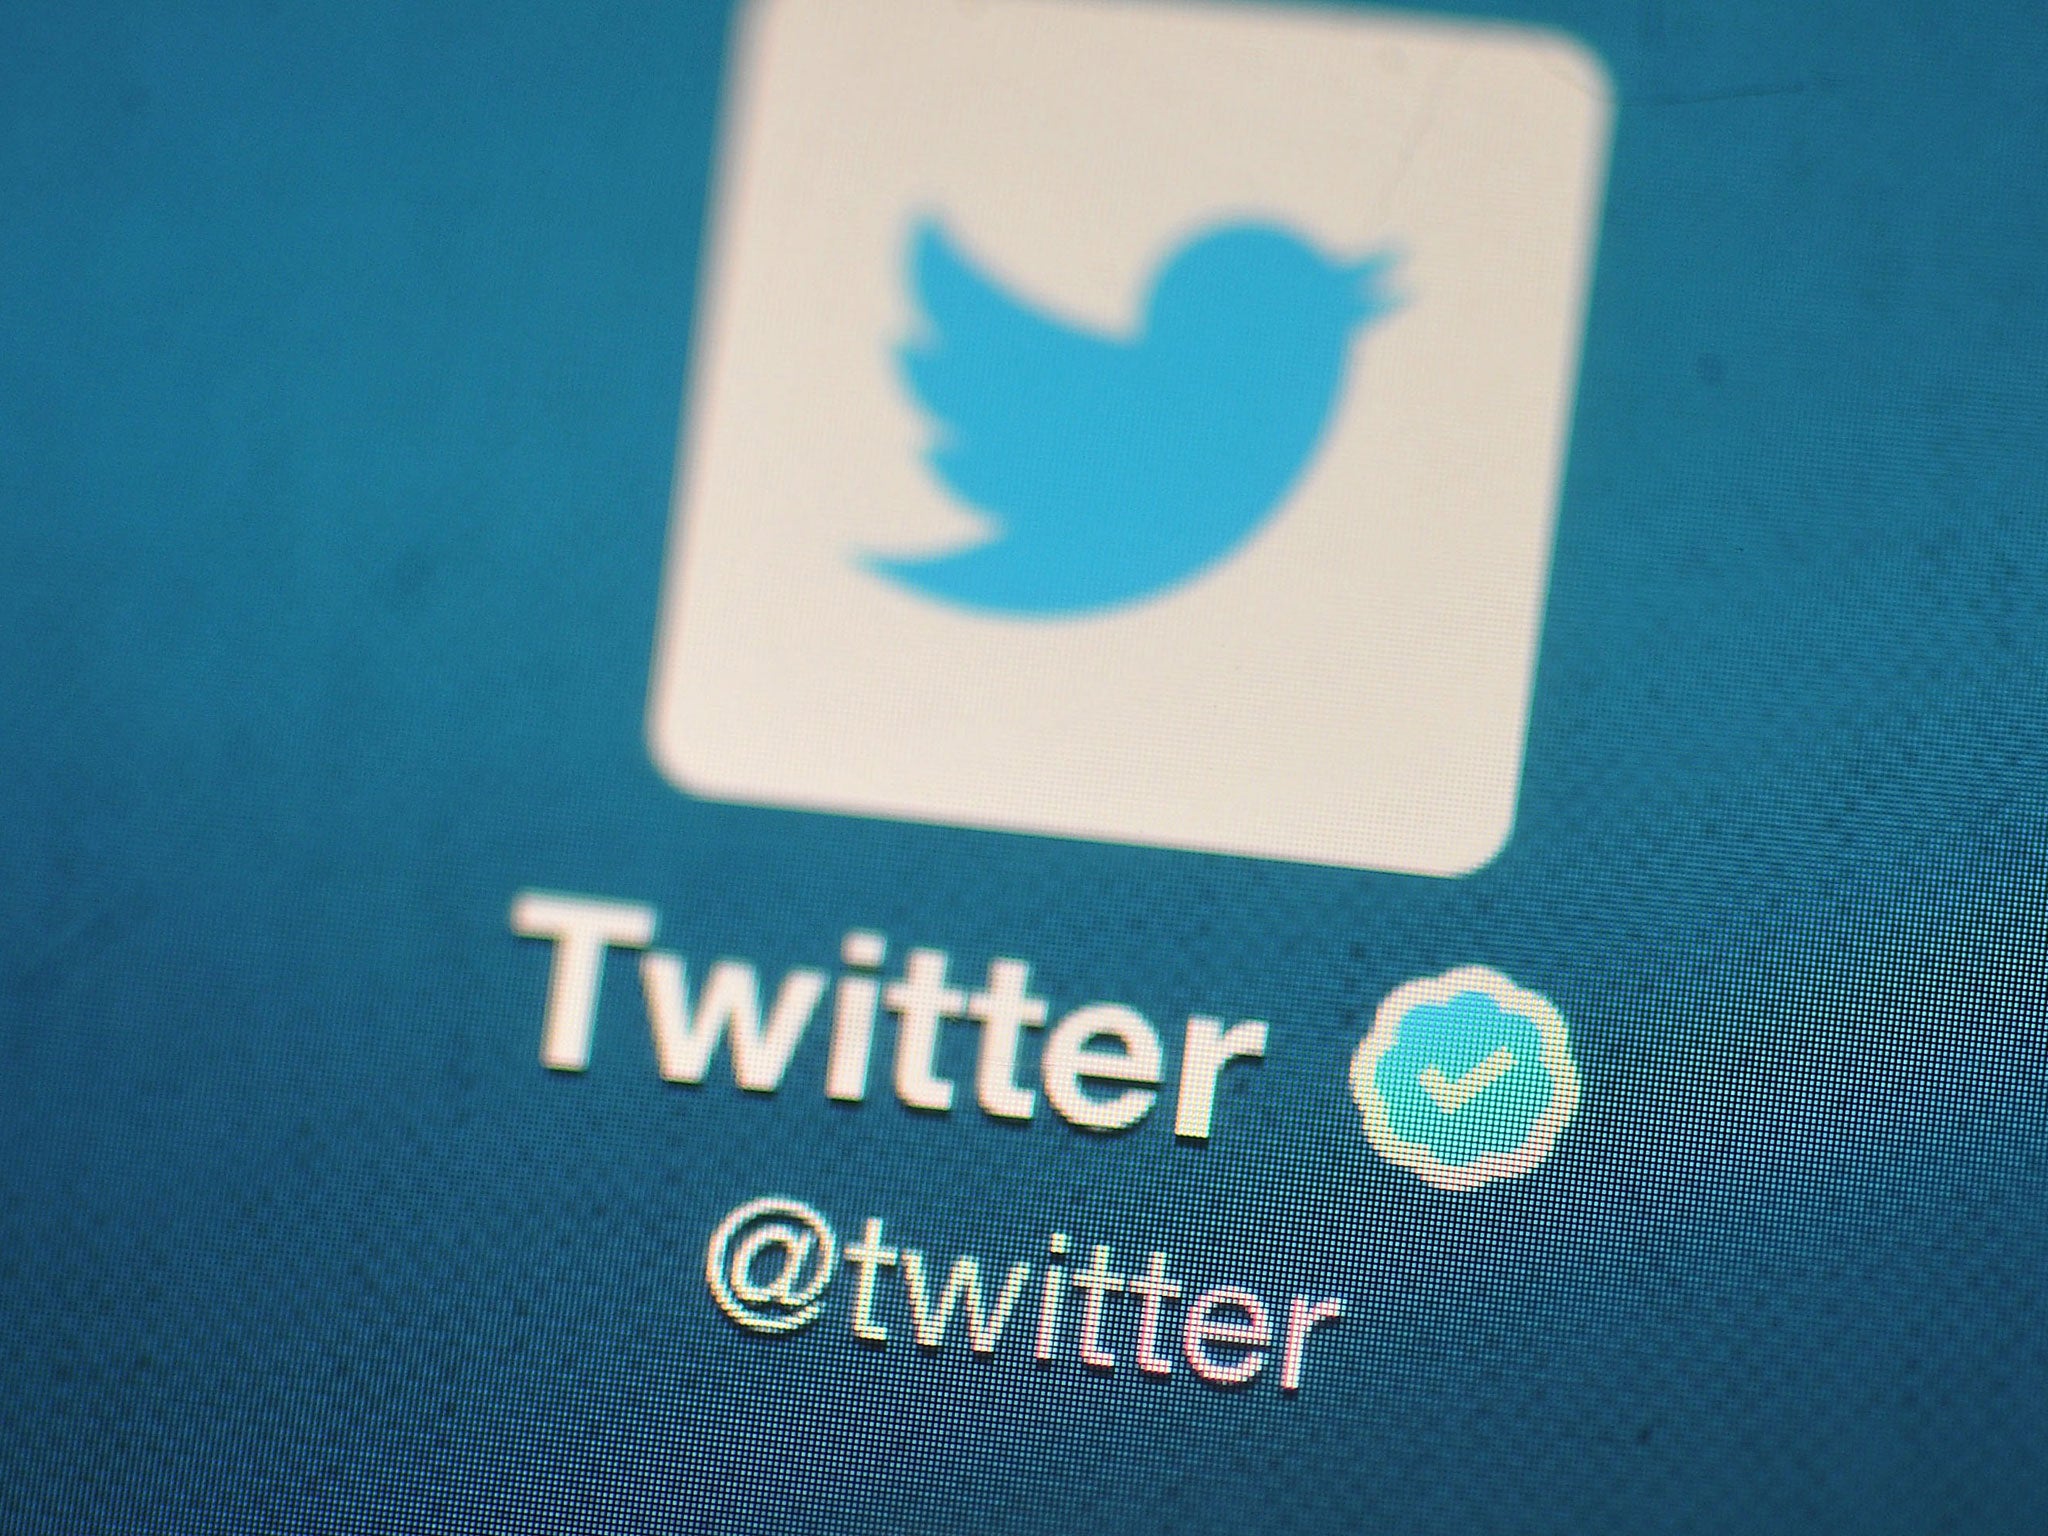 Twitter uses can now share a list of blocked accounts with others